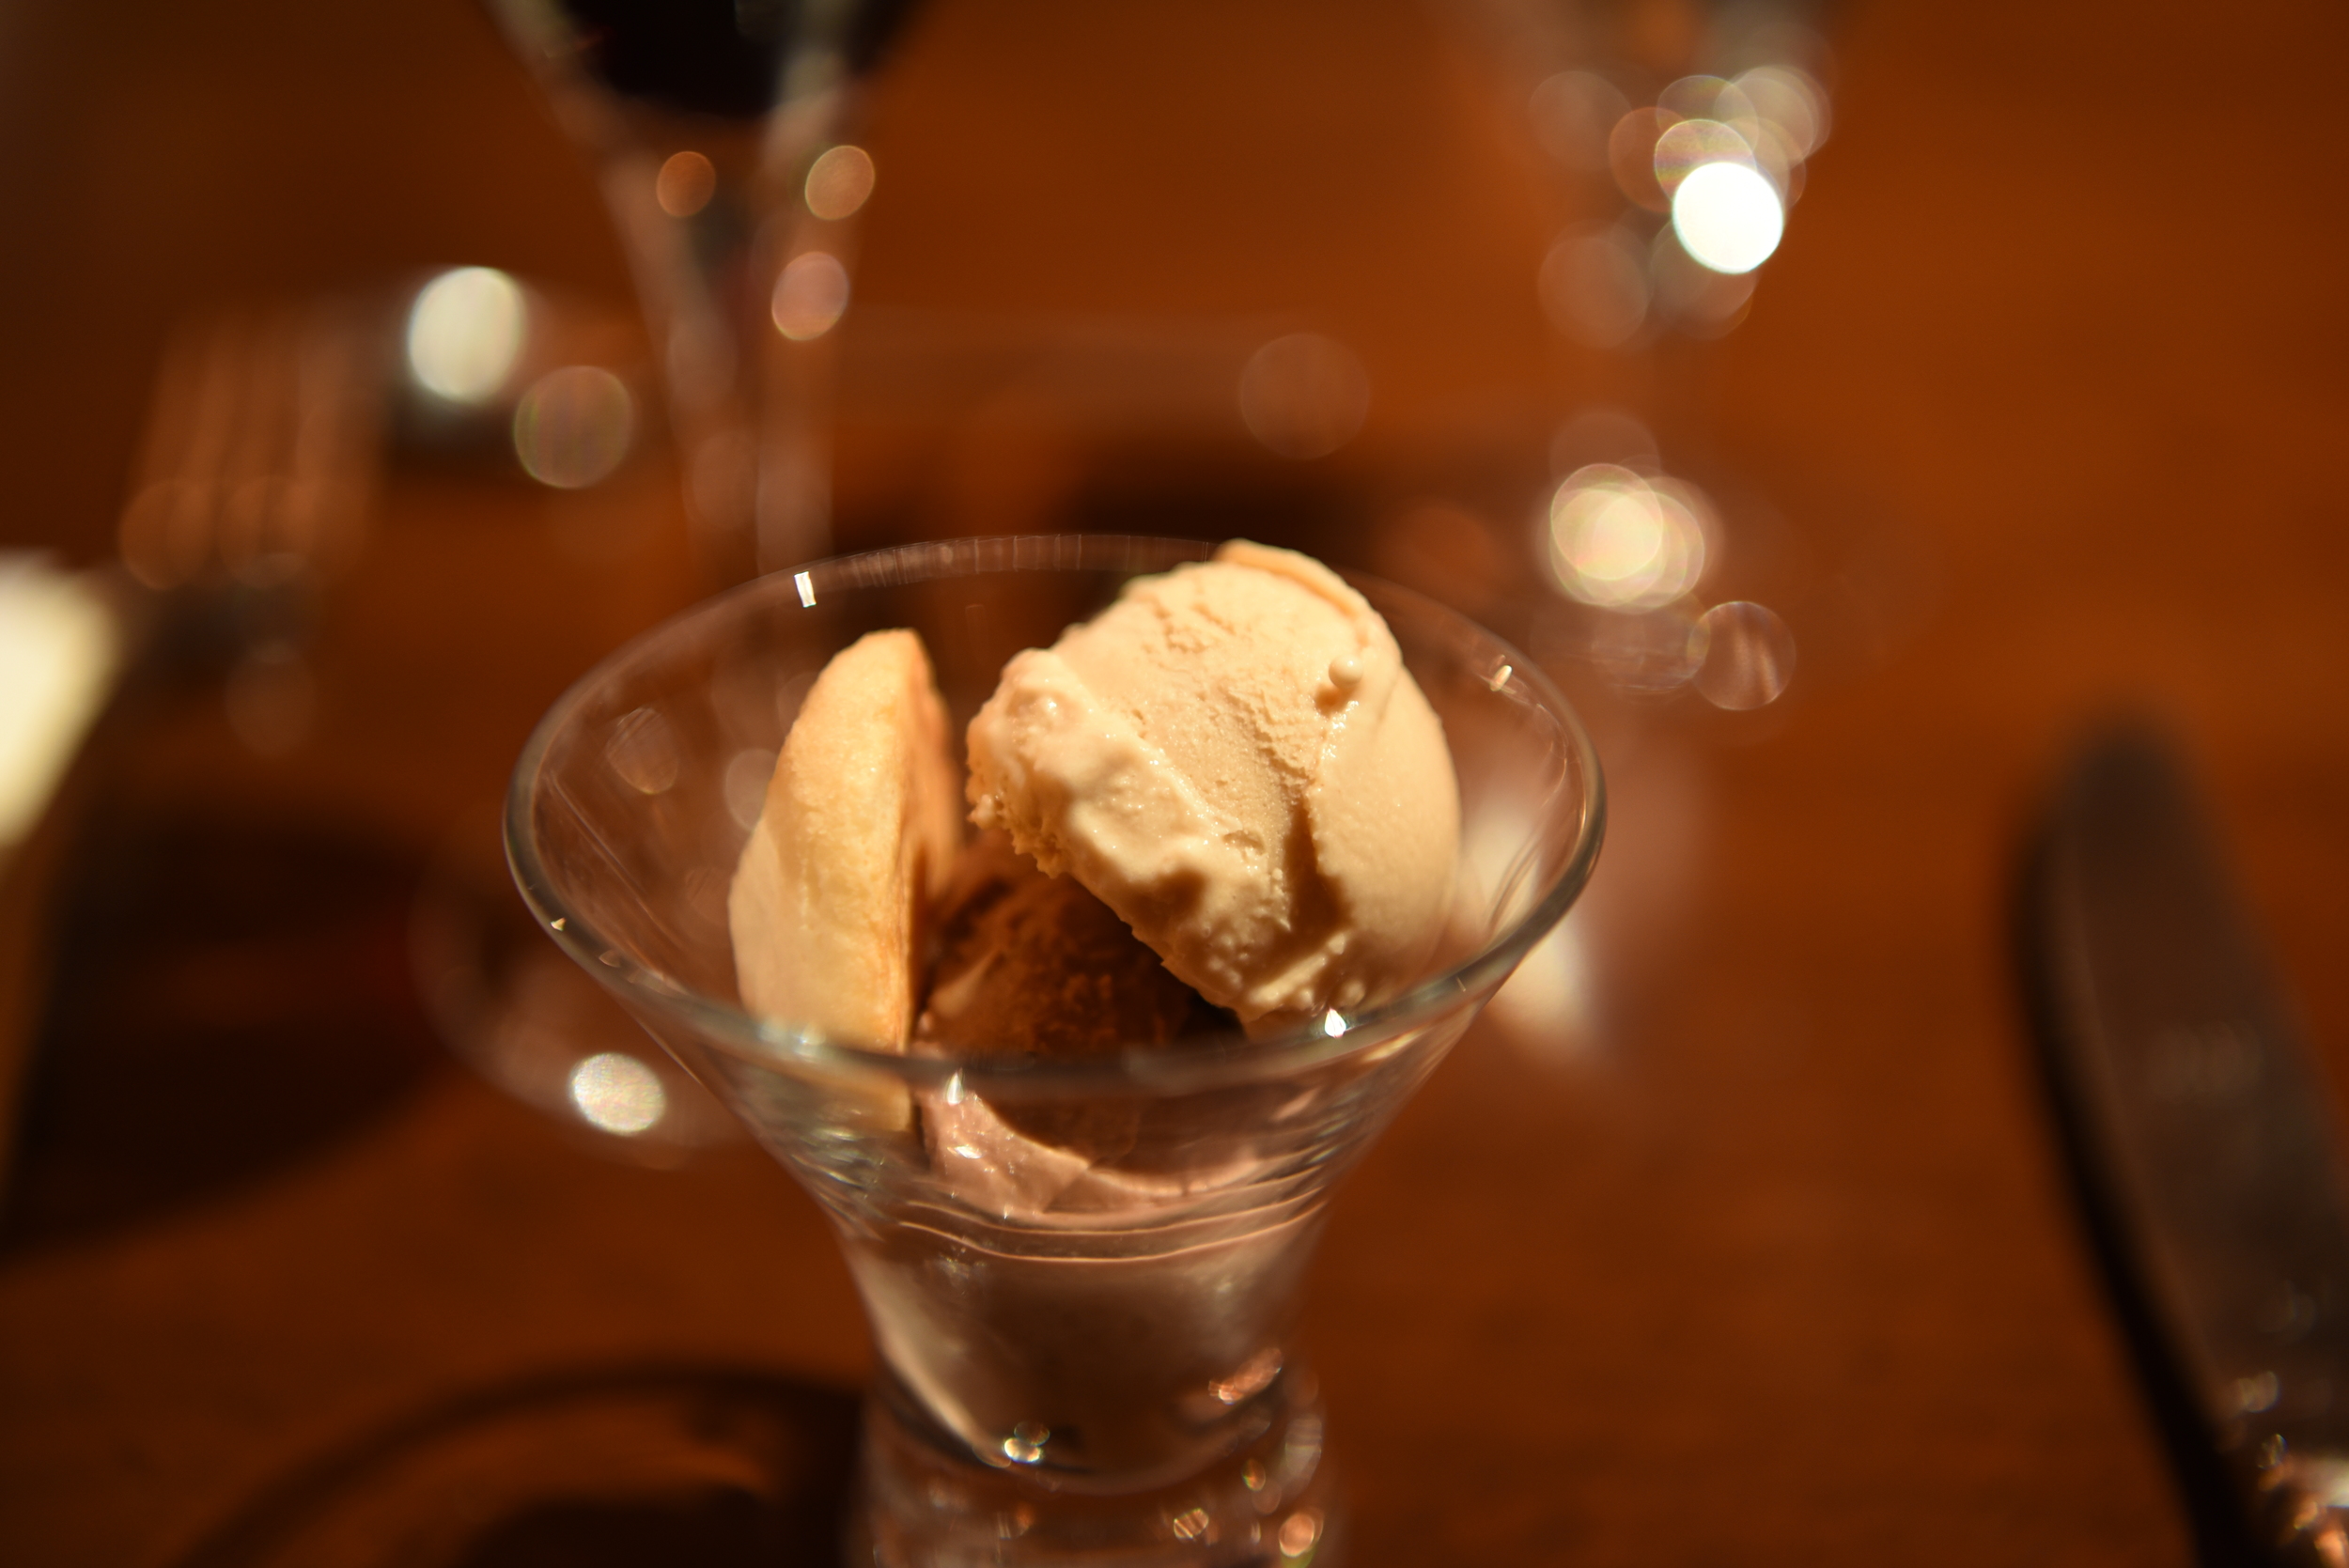 Coffee Gelato to pair with Amaretti cookies